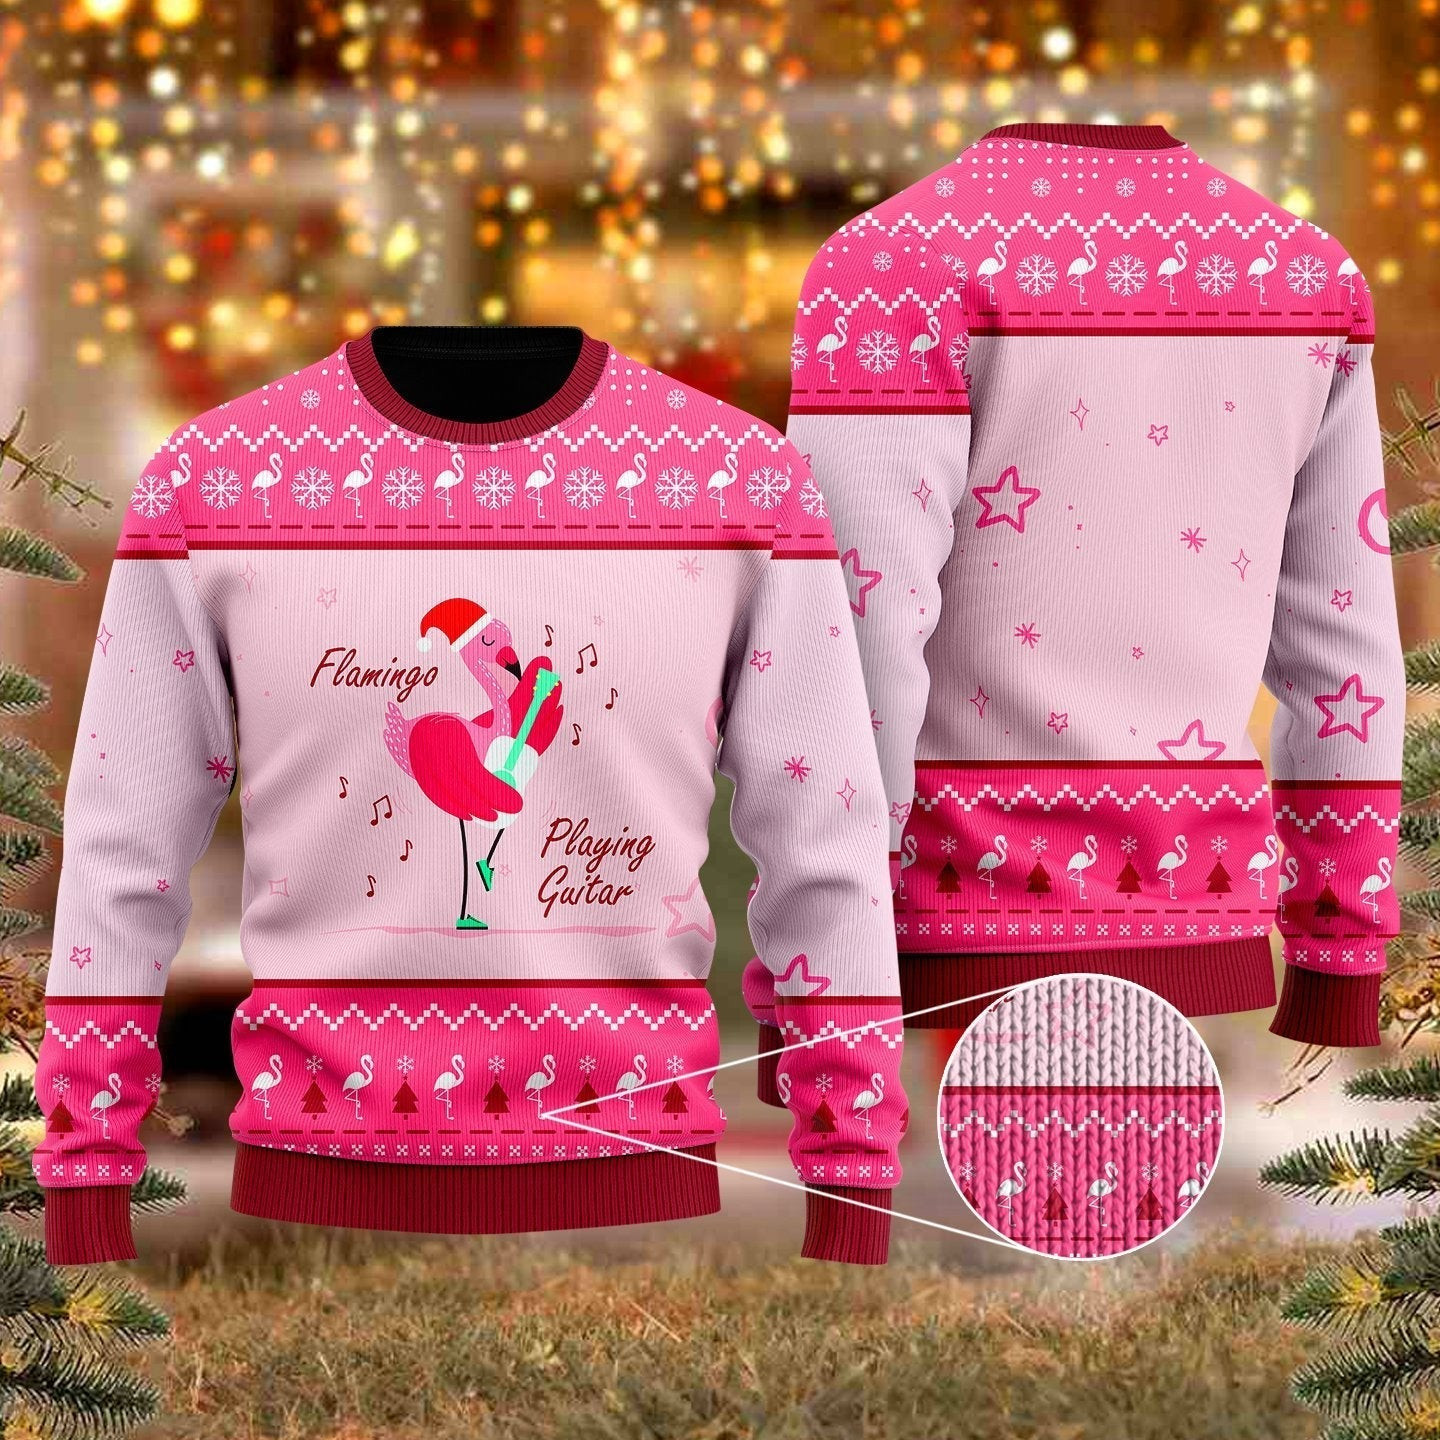 Funny Flamingo Playing Guitar Christmas Ugly Christmas Sweater Ugly Sweater For Men Women, Holiday Sweater